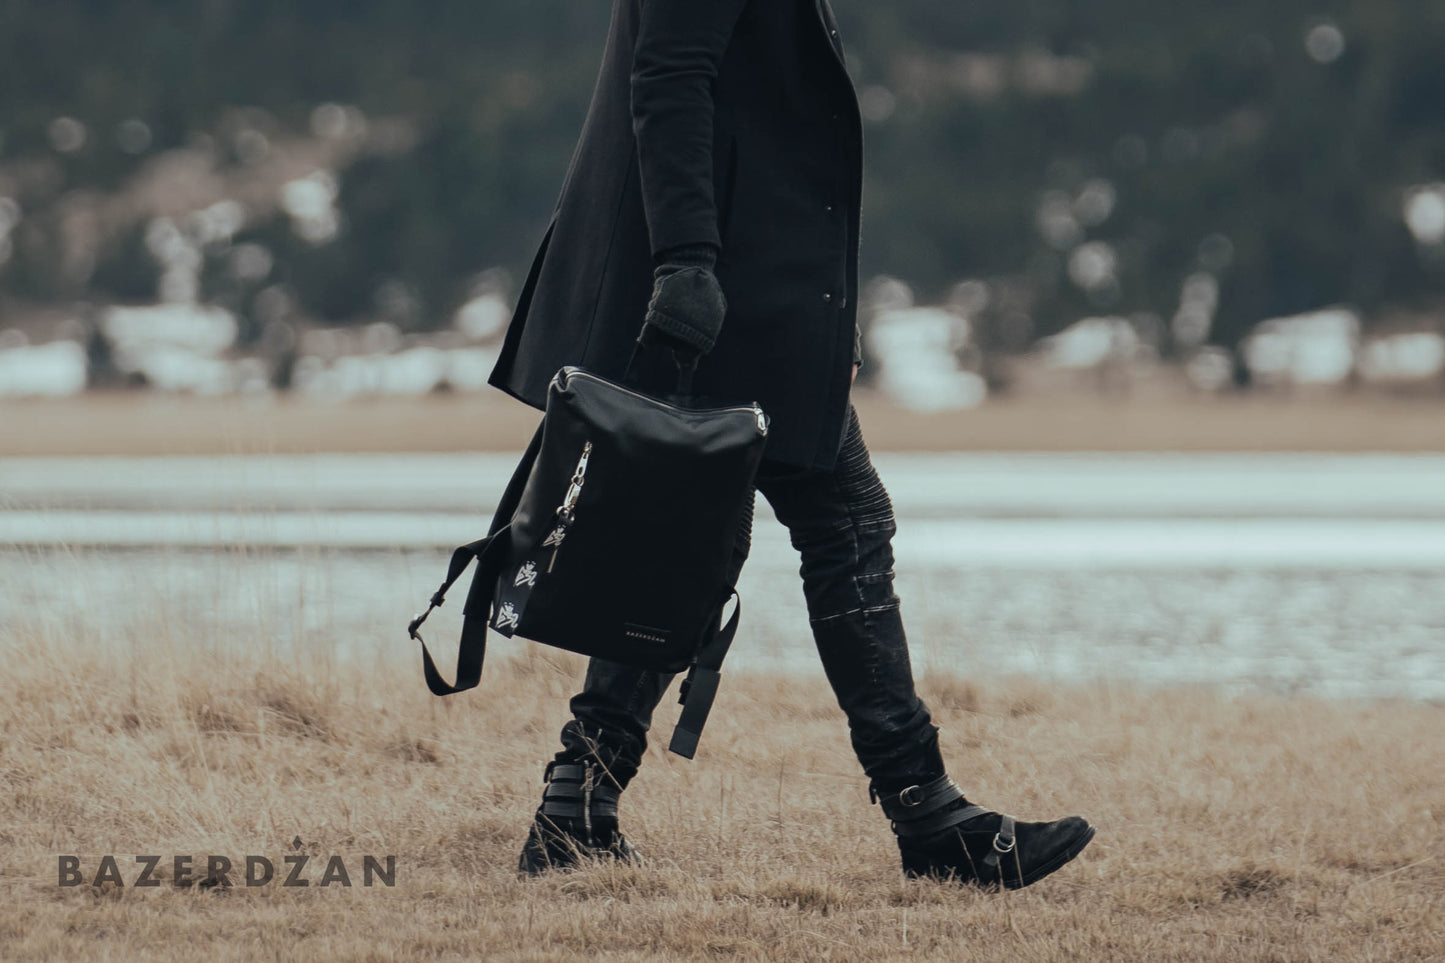 Leather Backpack For Men by Bazerdzan